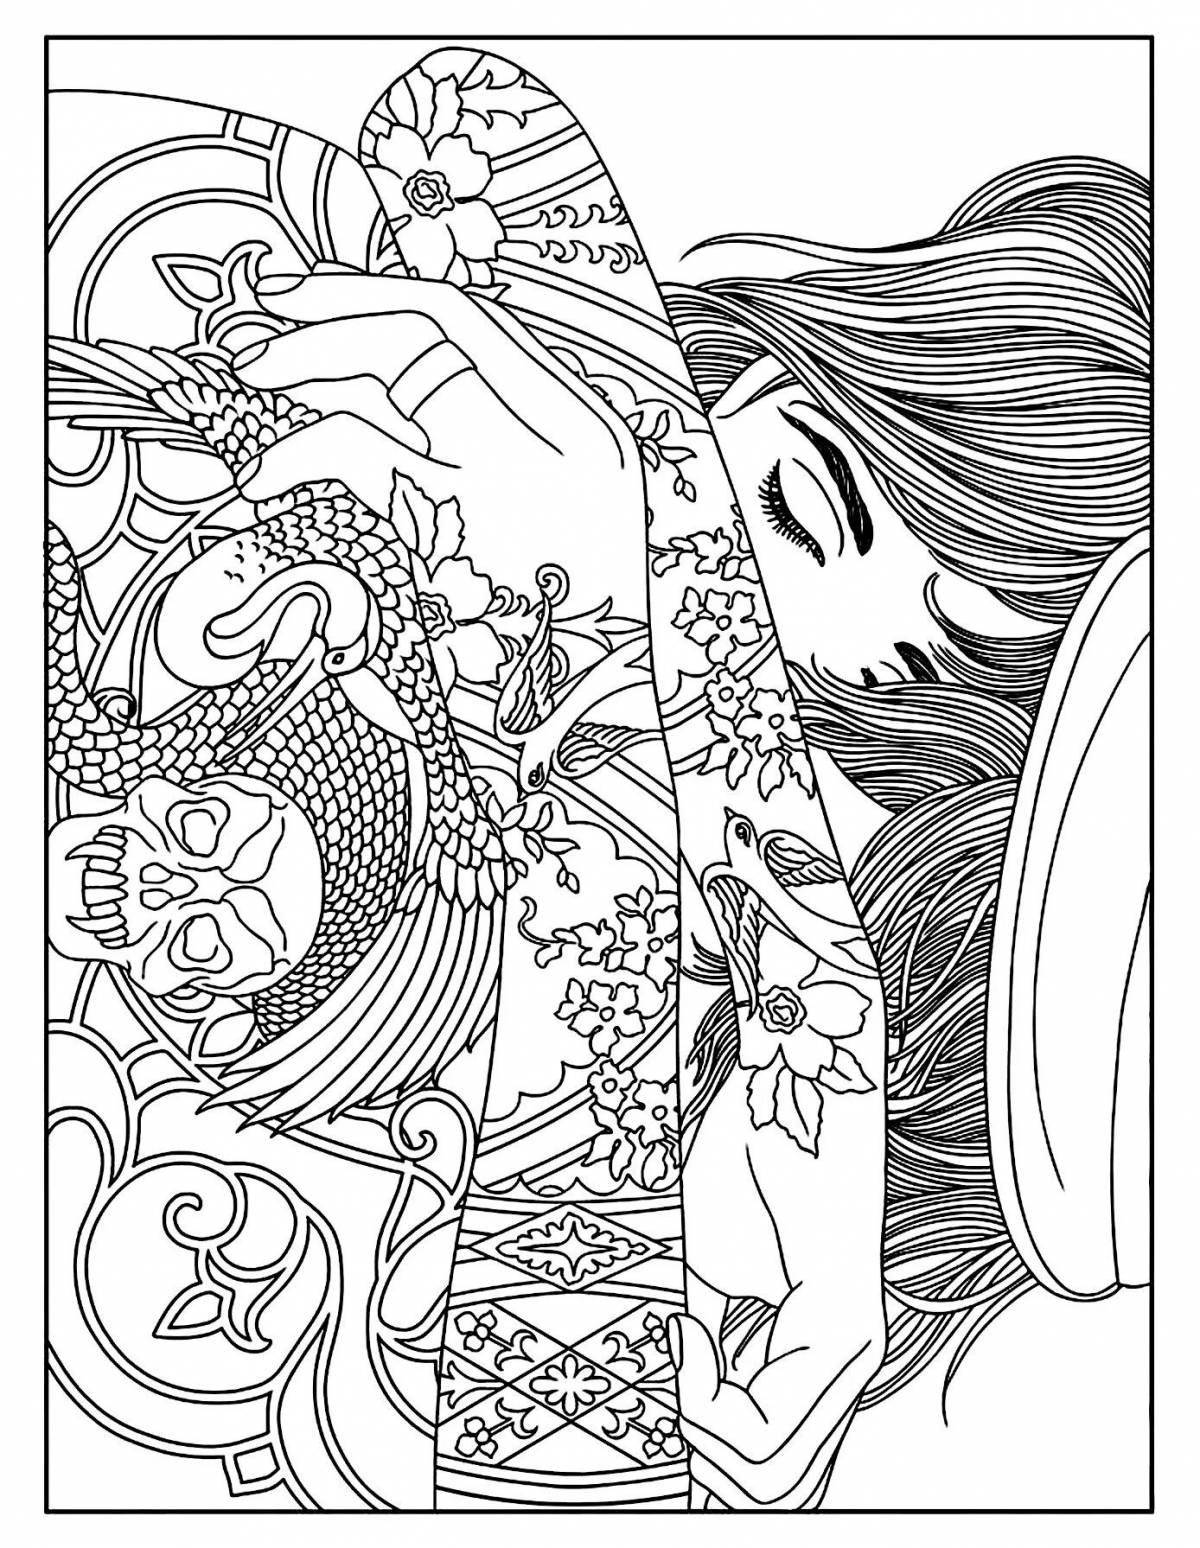 Intricate adult coloring book, large